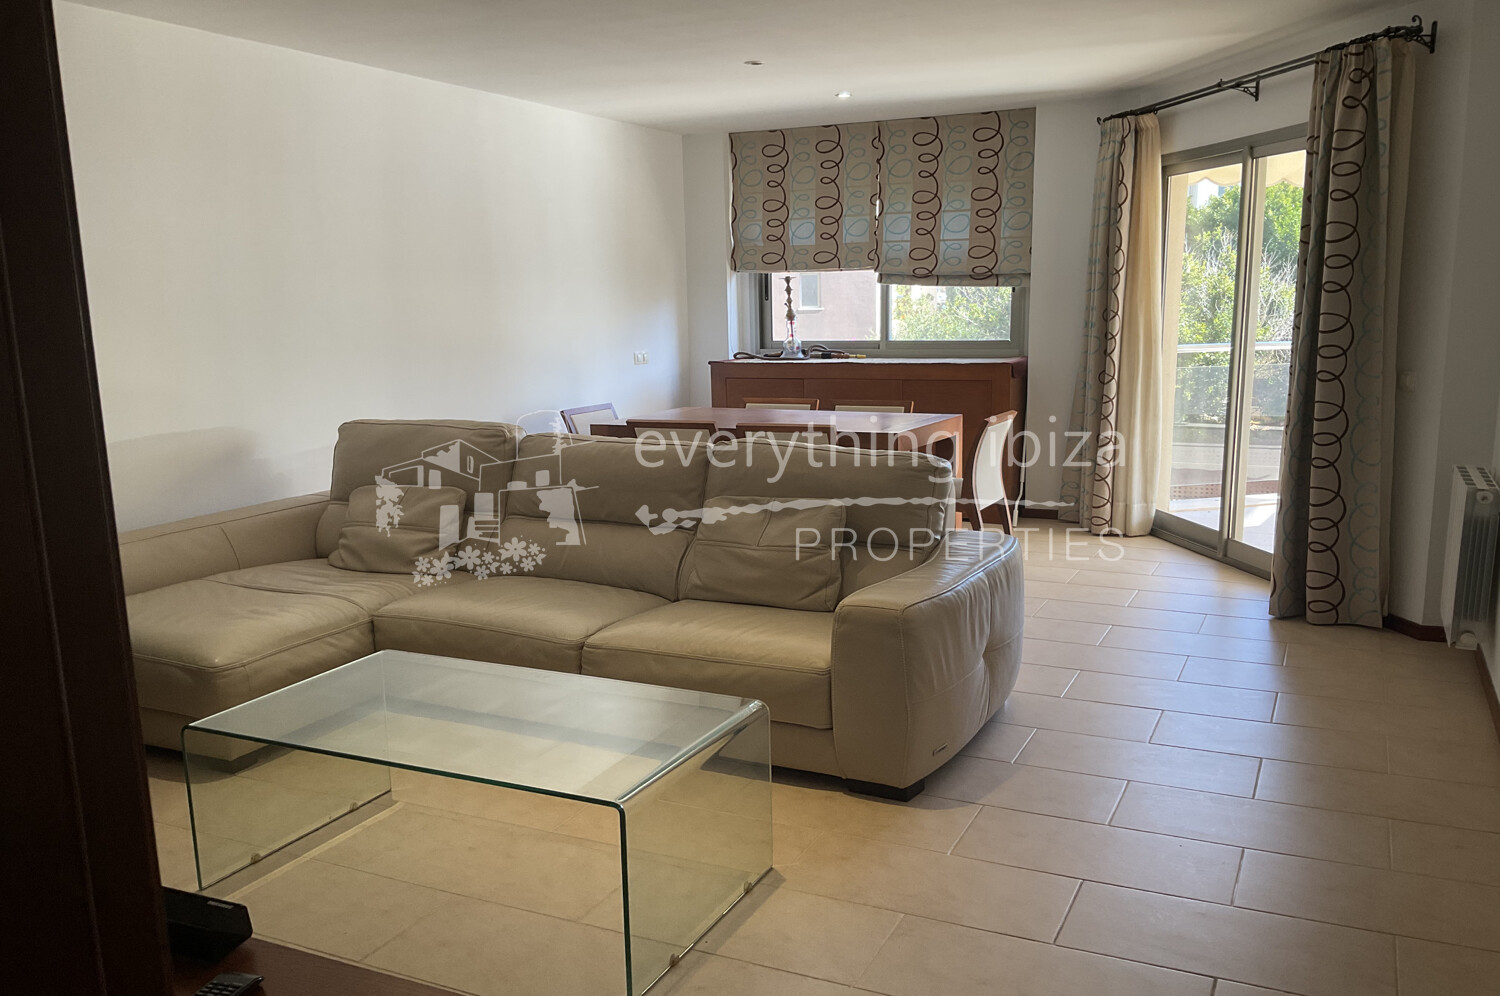 Delightful Contemporary Apartment Very Near Beach in Central Santa Eulalia, ref. 1675, for sale in Ibiza by everything ibiza Properties